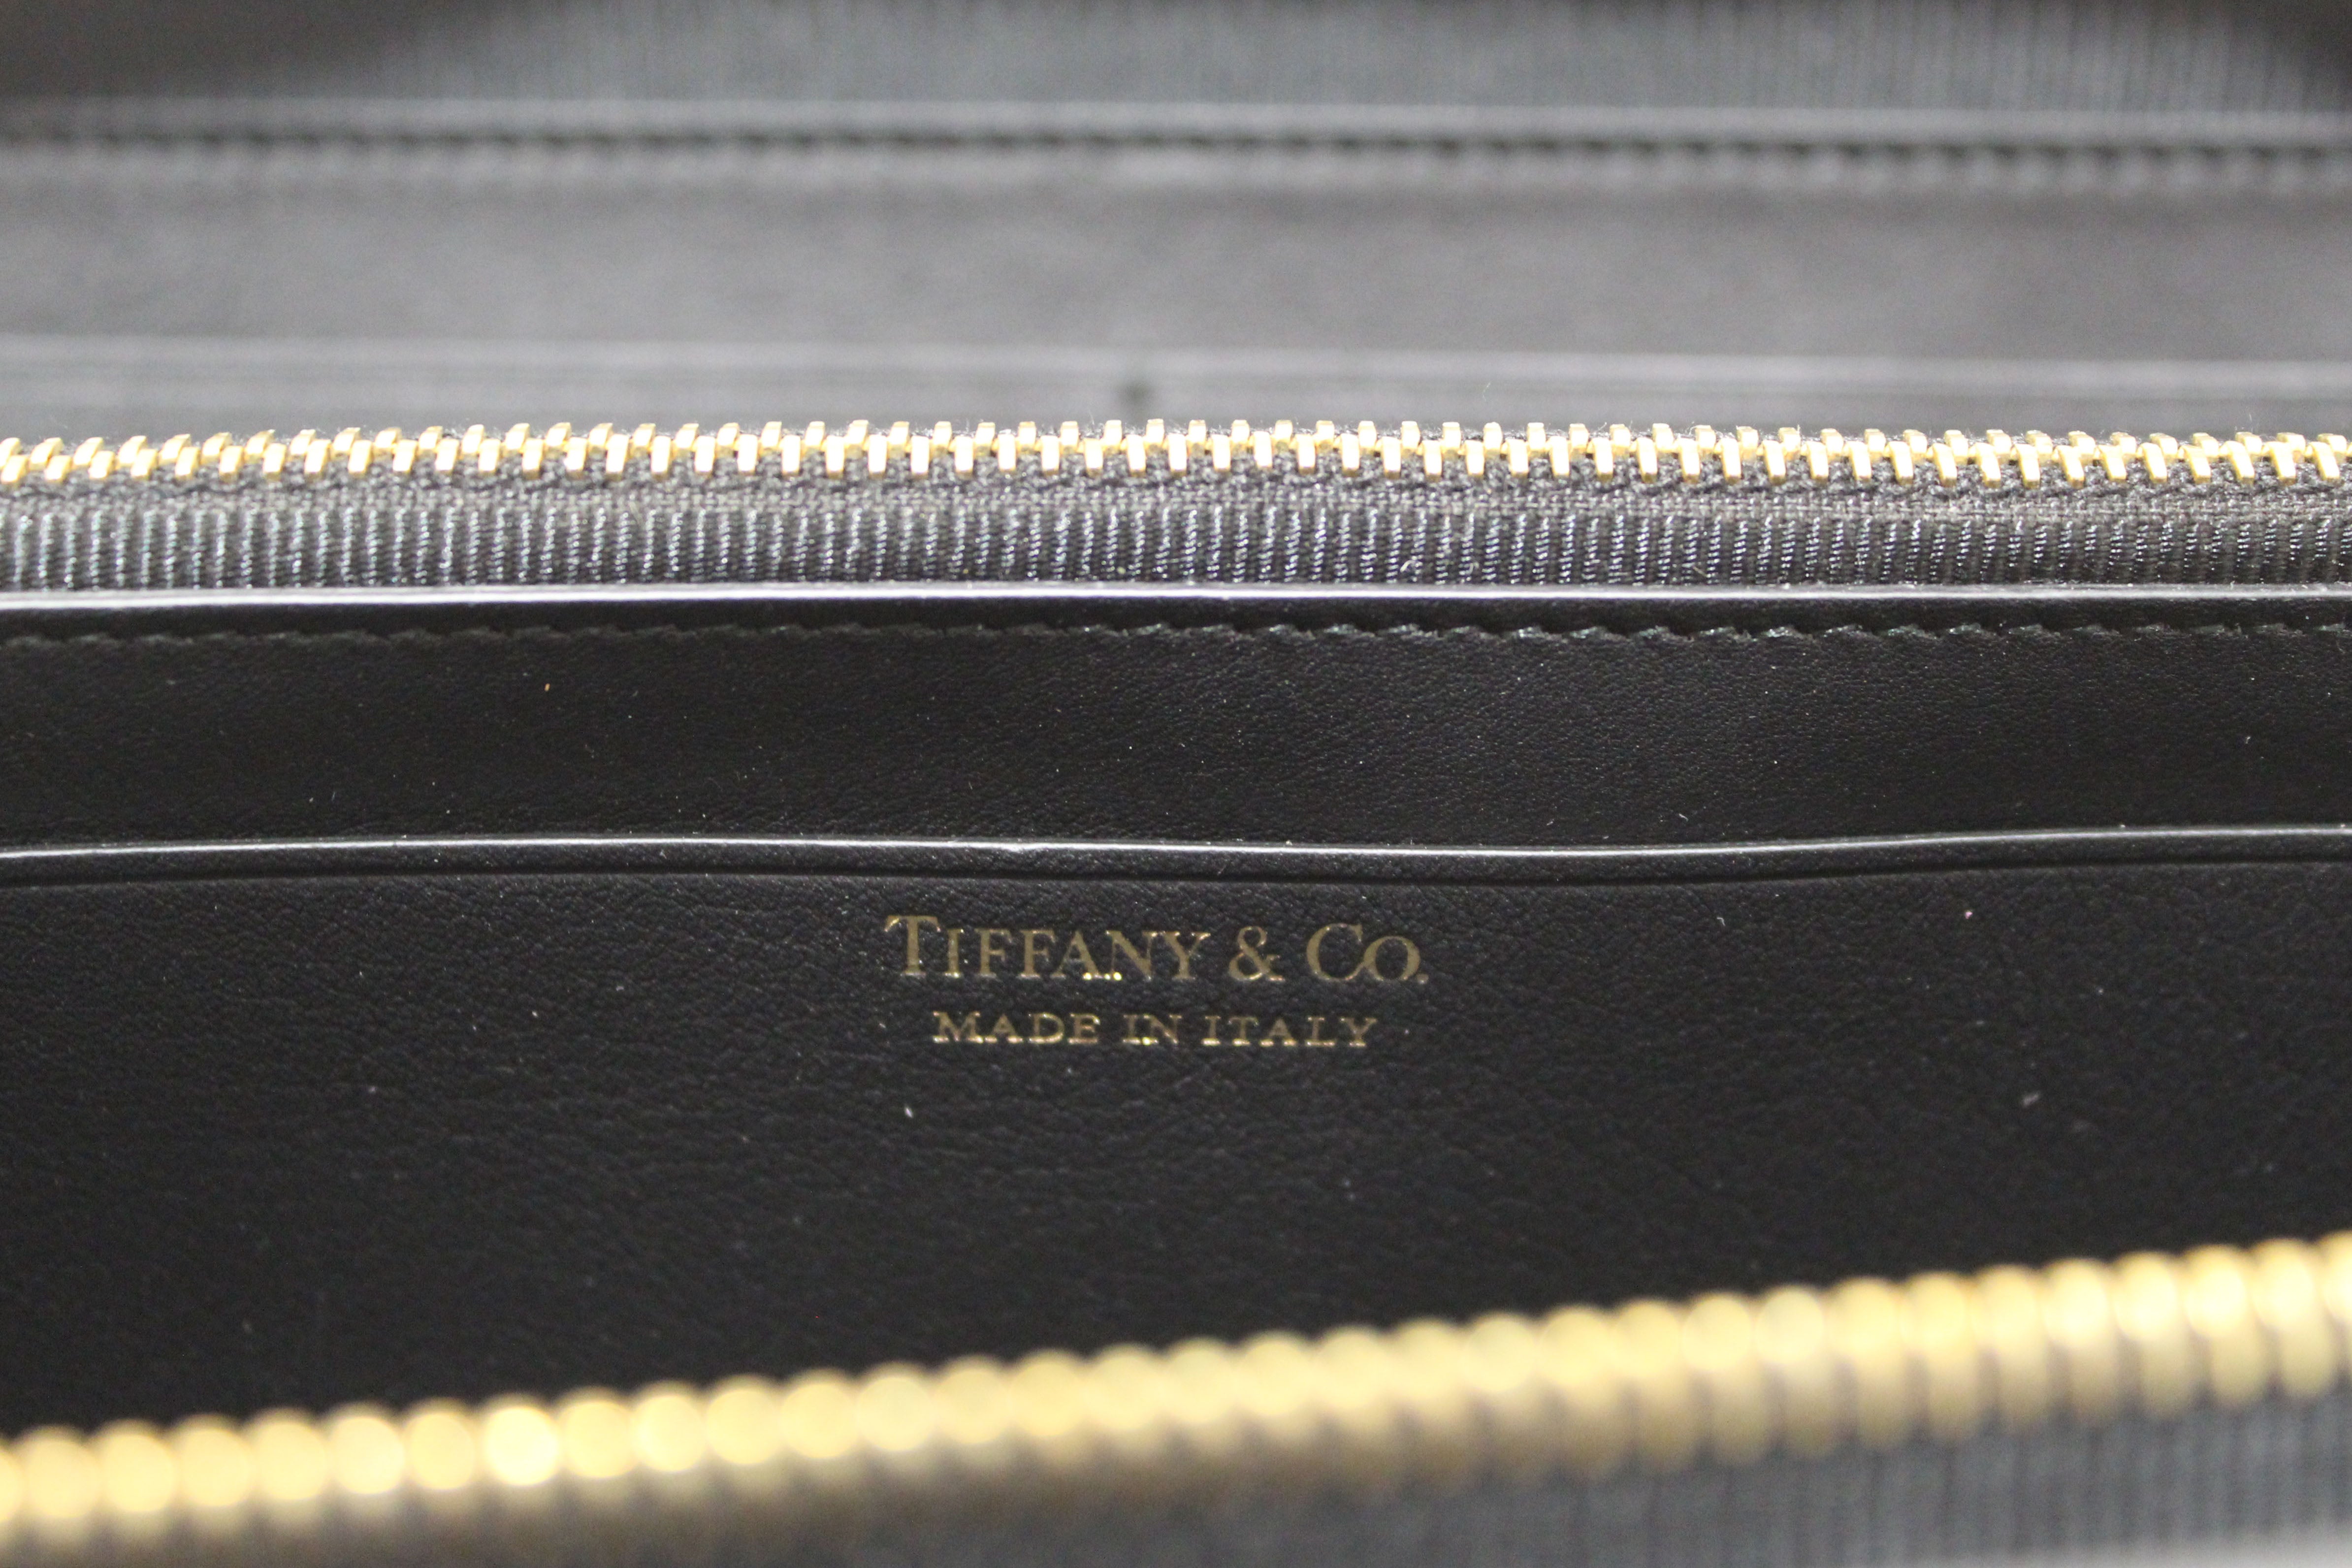 Authentic NEW Tiffany & Co. Black Calfskin Leather Large Long Zippy Wallet